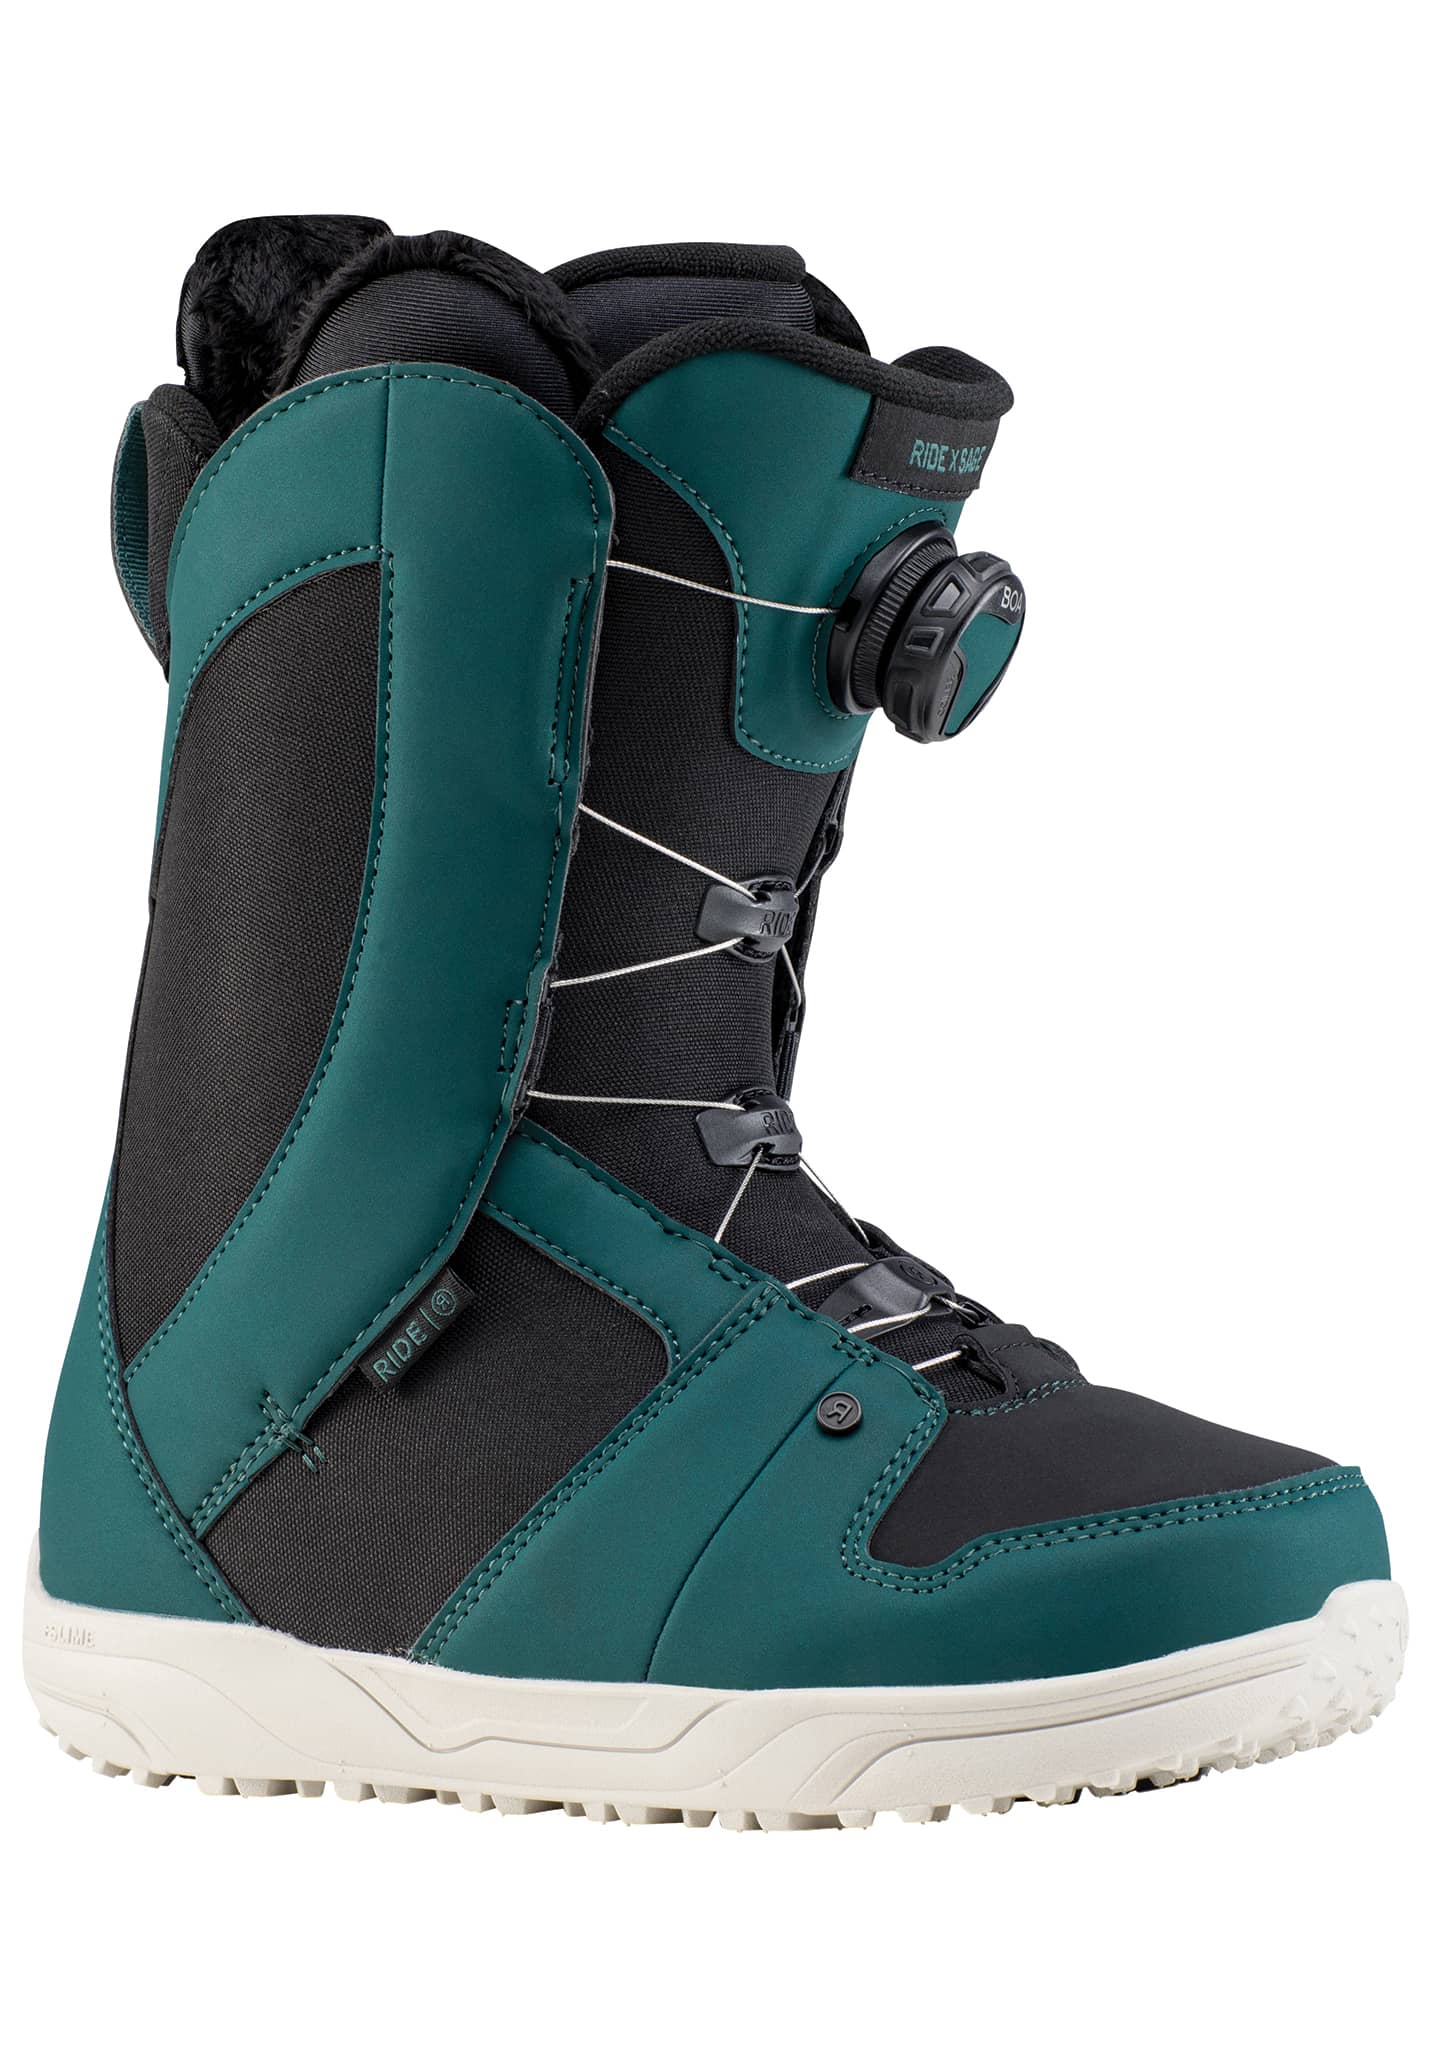 Ride Sage All Mountain Snowboard Boots green 40